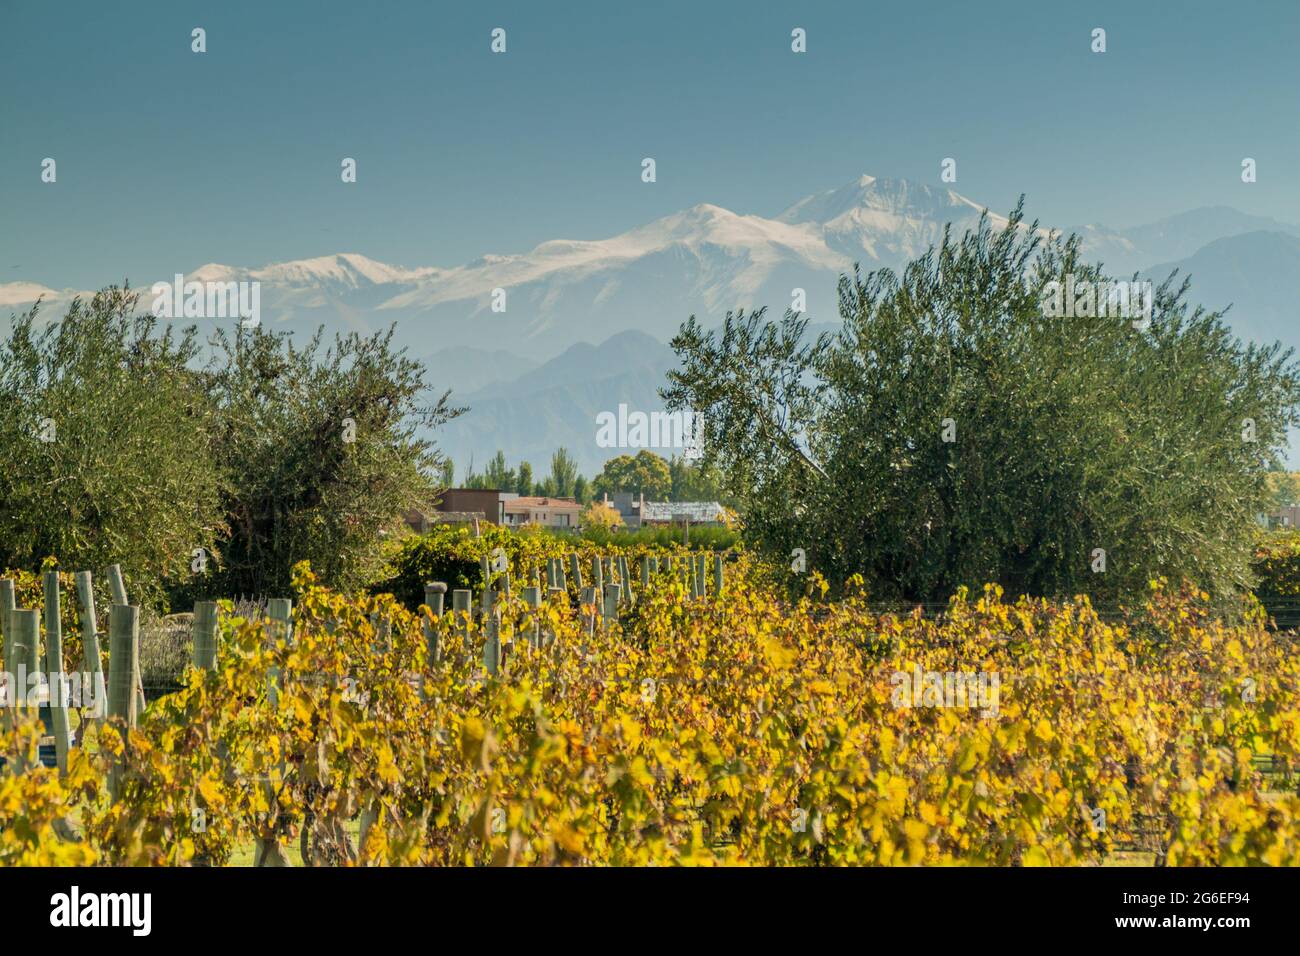 Vineyard near Mendoza, Argentina. Andes mountains in the background. Stock Photo